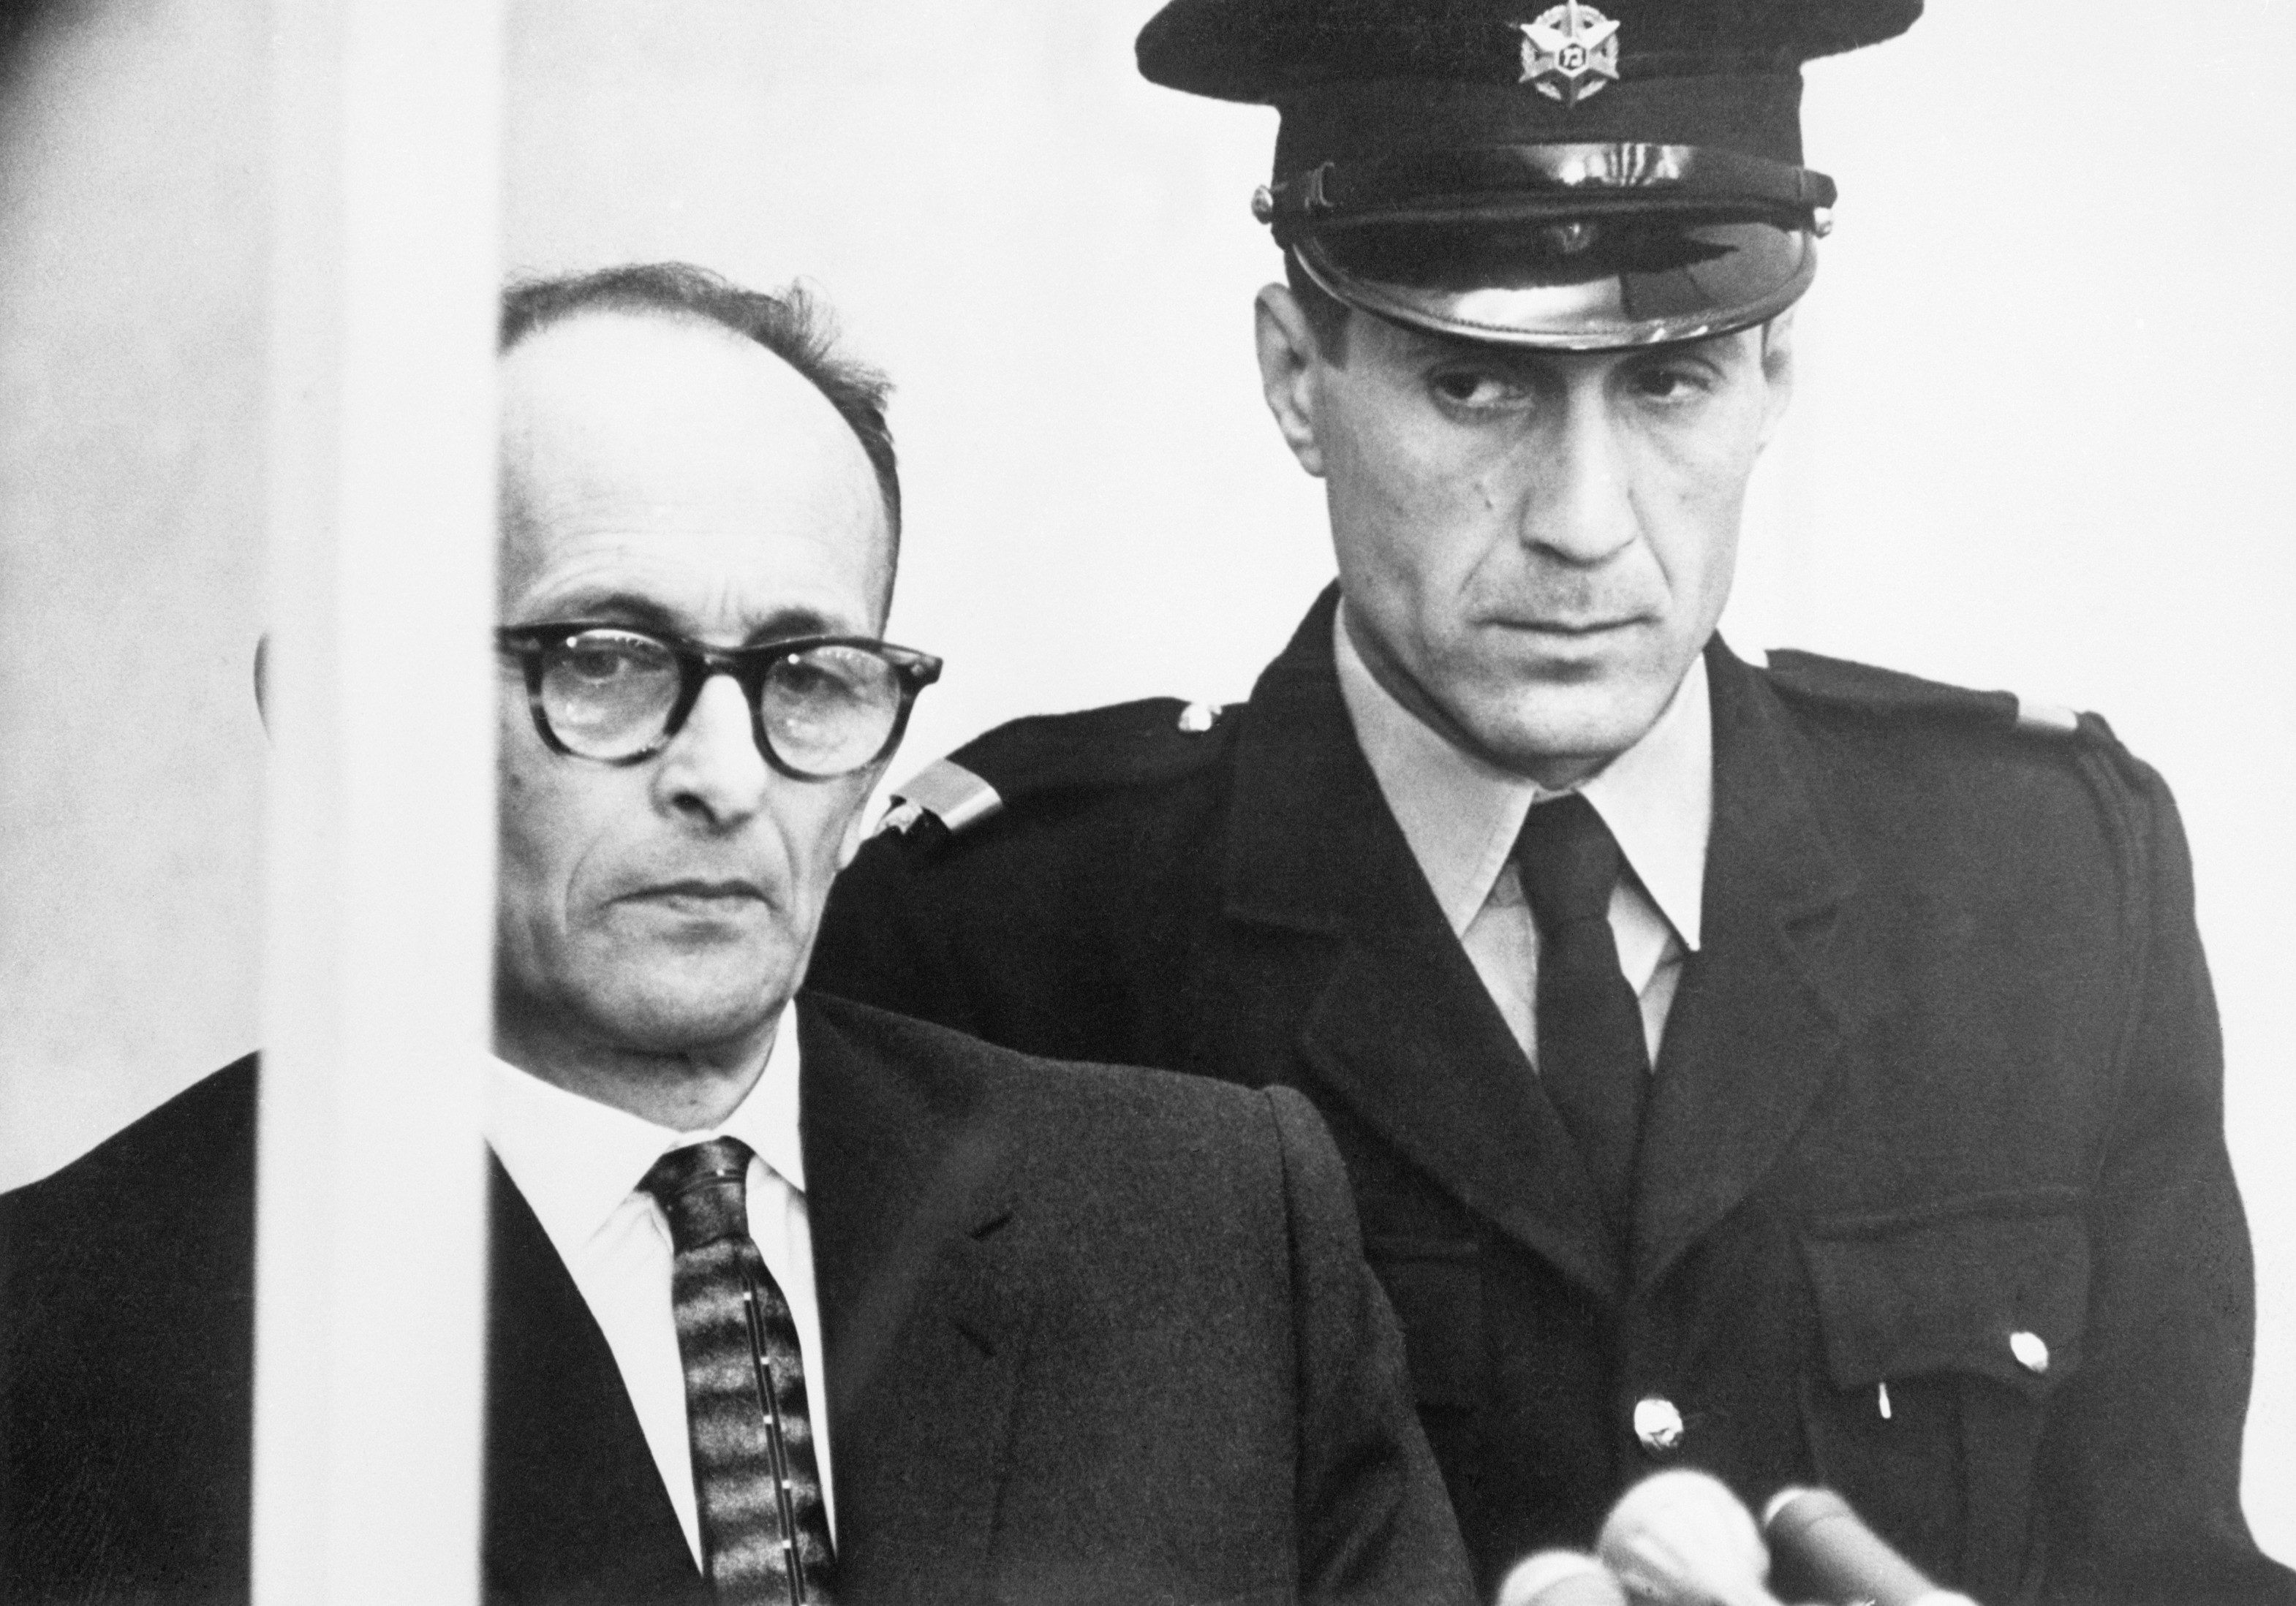 11 Apr 1961, Jerusalem, Israel --- Original caption: 4/11/1961-Jerusalem, Israel- A thin faced Adolf Eichmann listens to the reading of a 15 count indictment, accusing him of the murder of millions of Jews during World War II, as a guard stands beside him (R), April 11. The reading of the charges at the trial's opening took an hour and 15 minutes. --- Image by © Bettmann/CORBIS